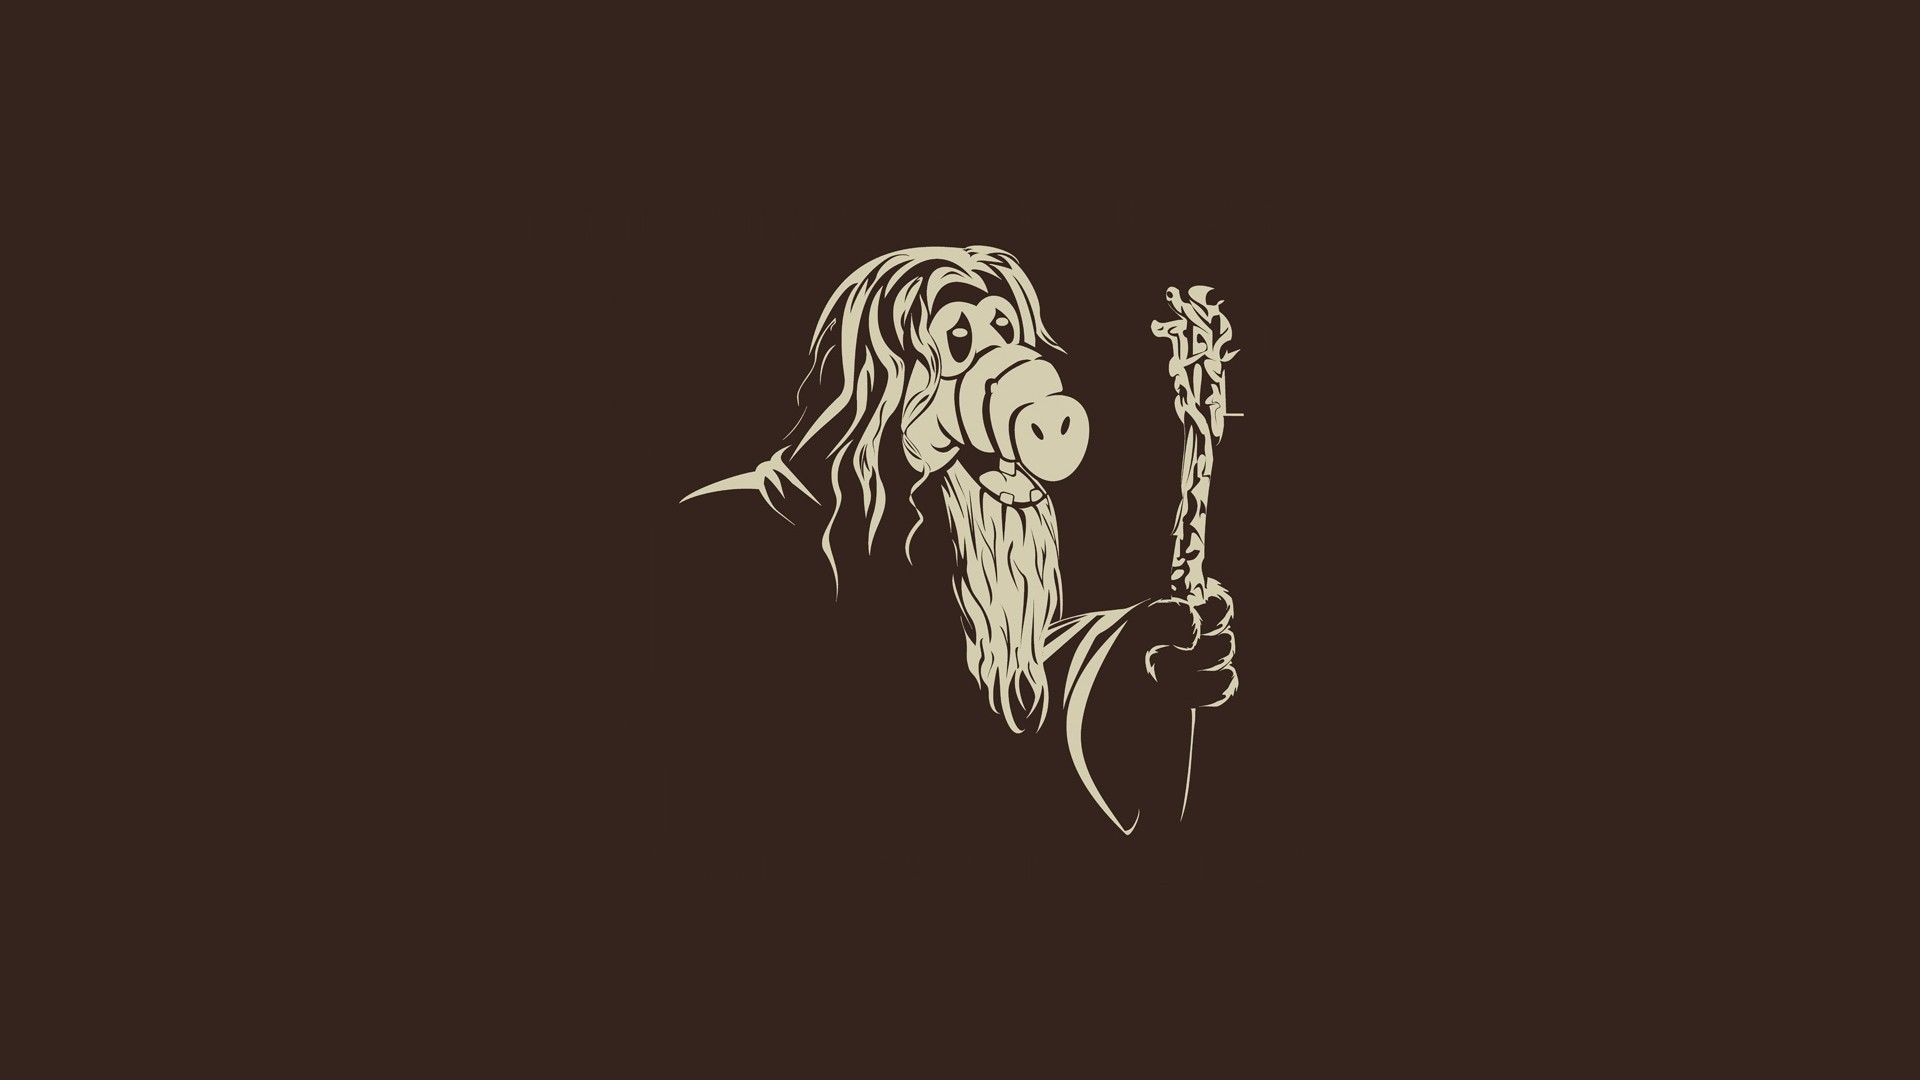 General 1920x1080 Alf Gandalf The Lord of the Rings crossover humor brown brown background minimalism